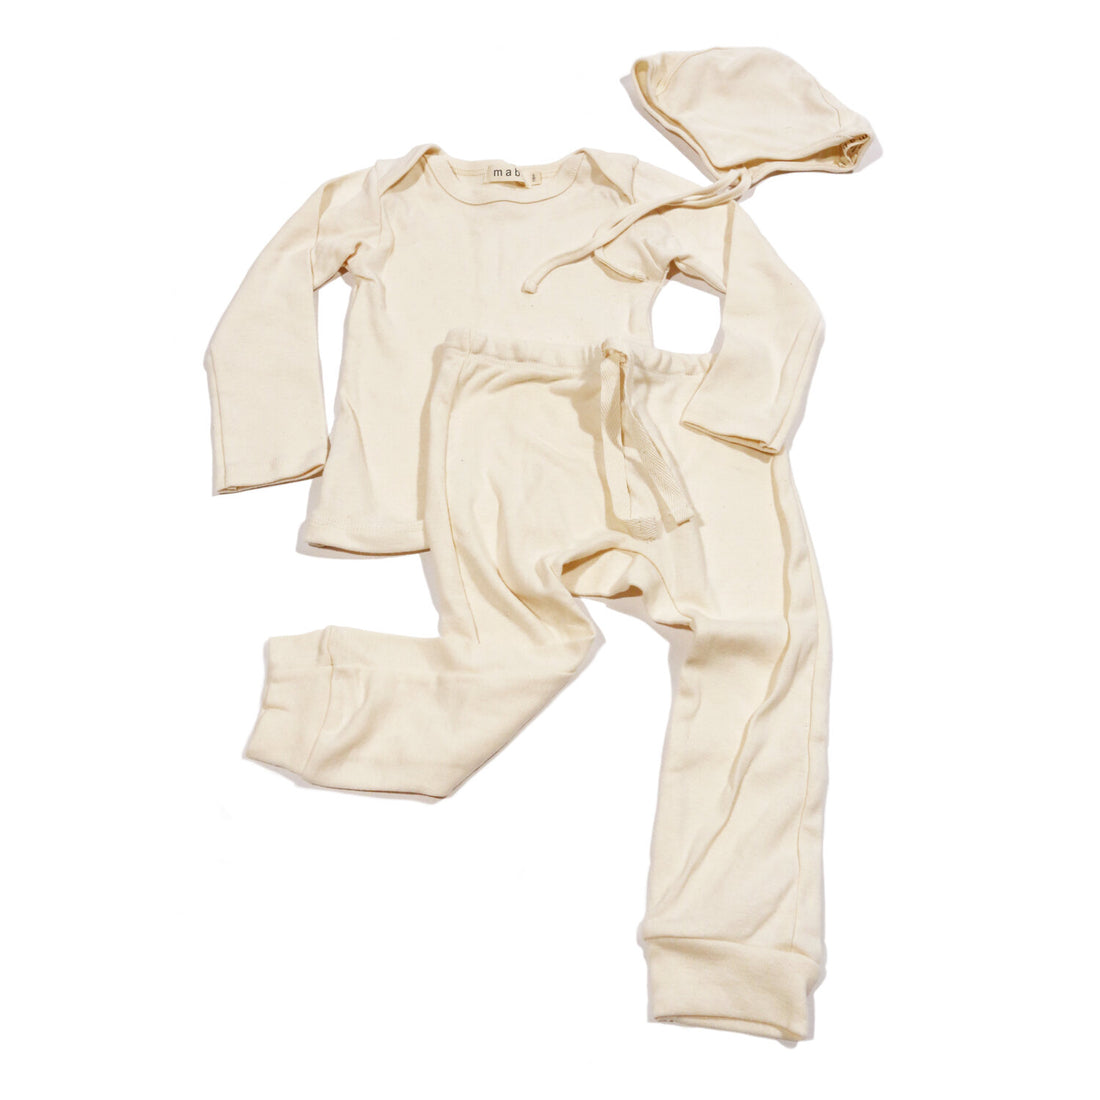 MABO Layette Set in Natural